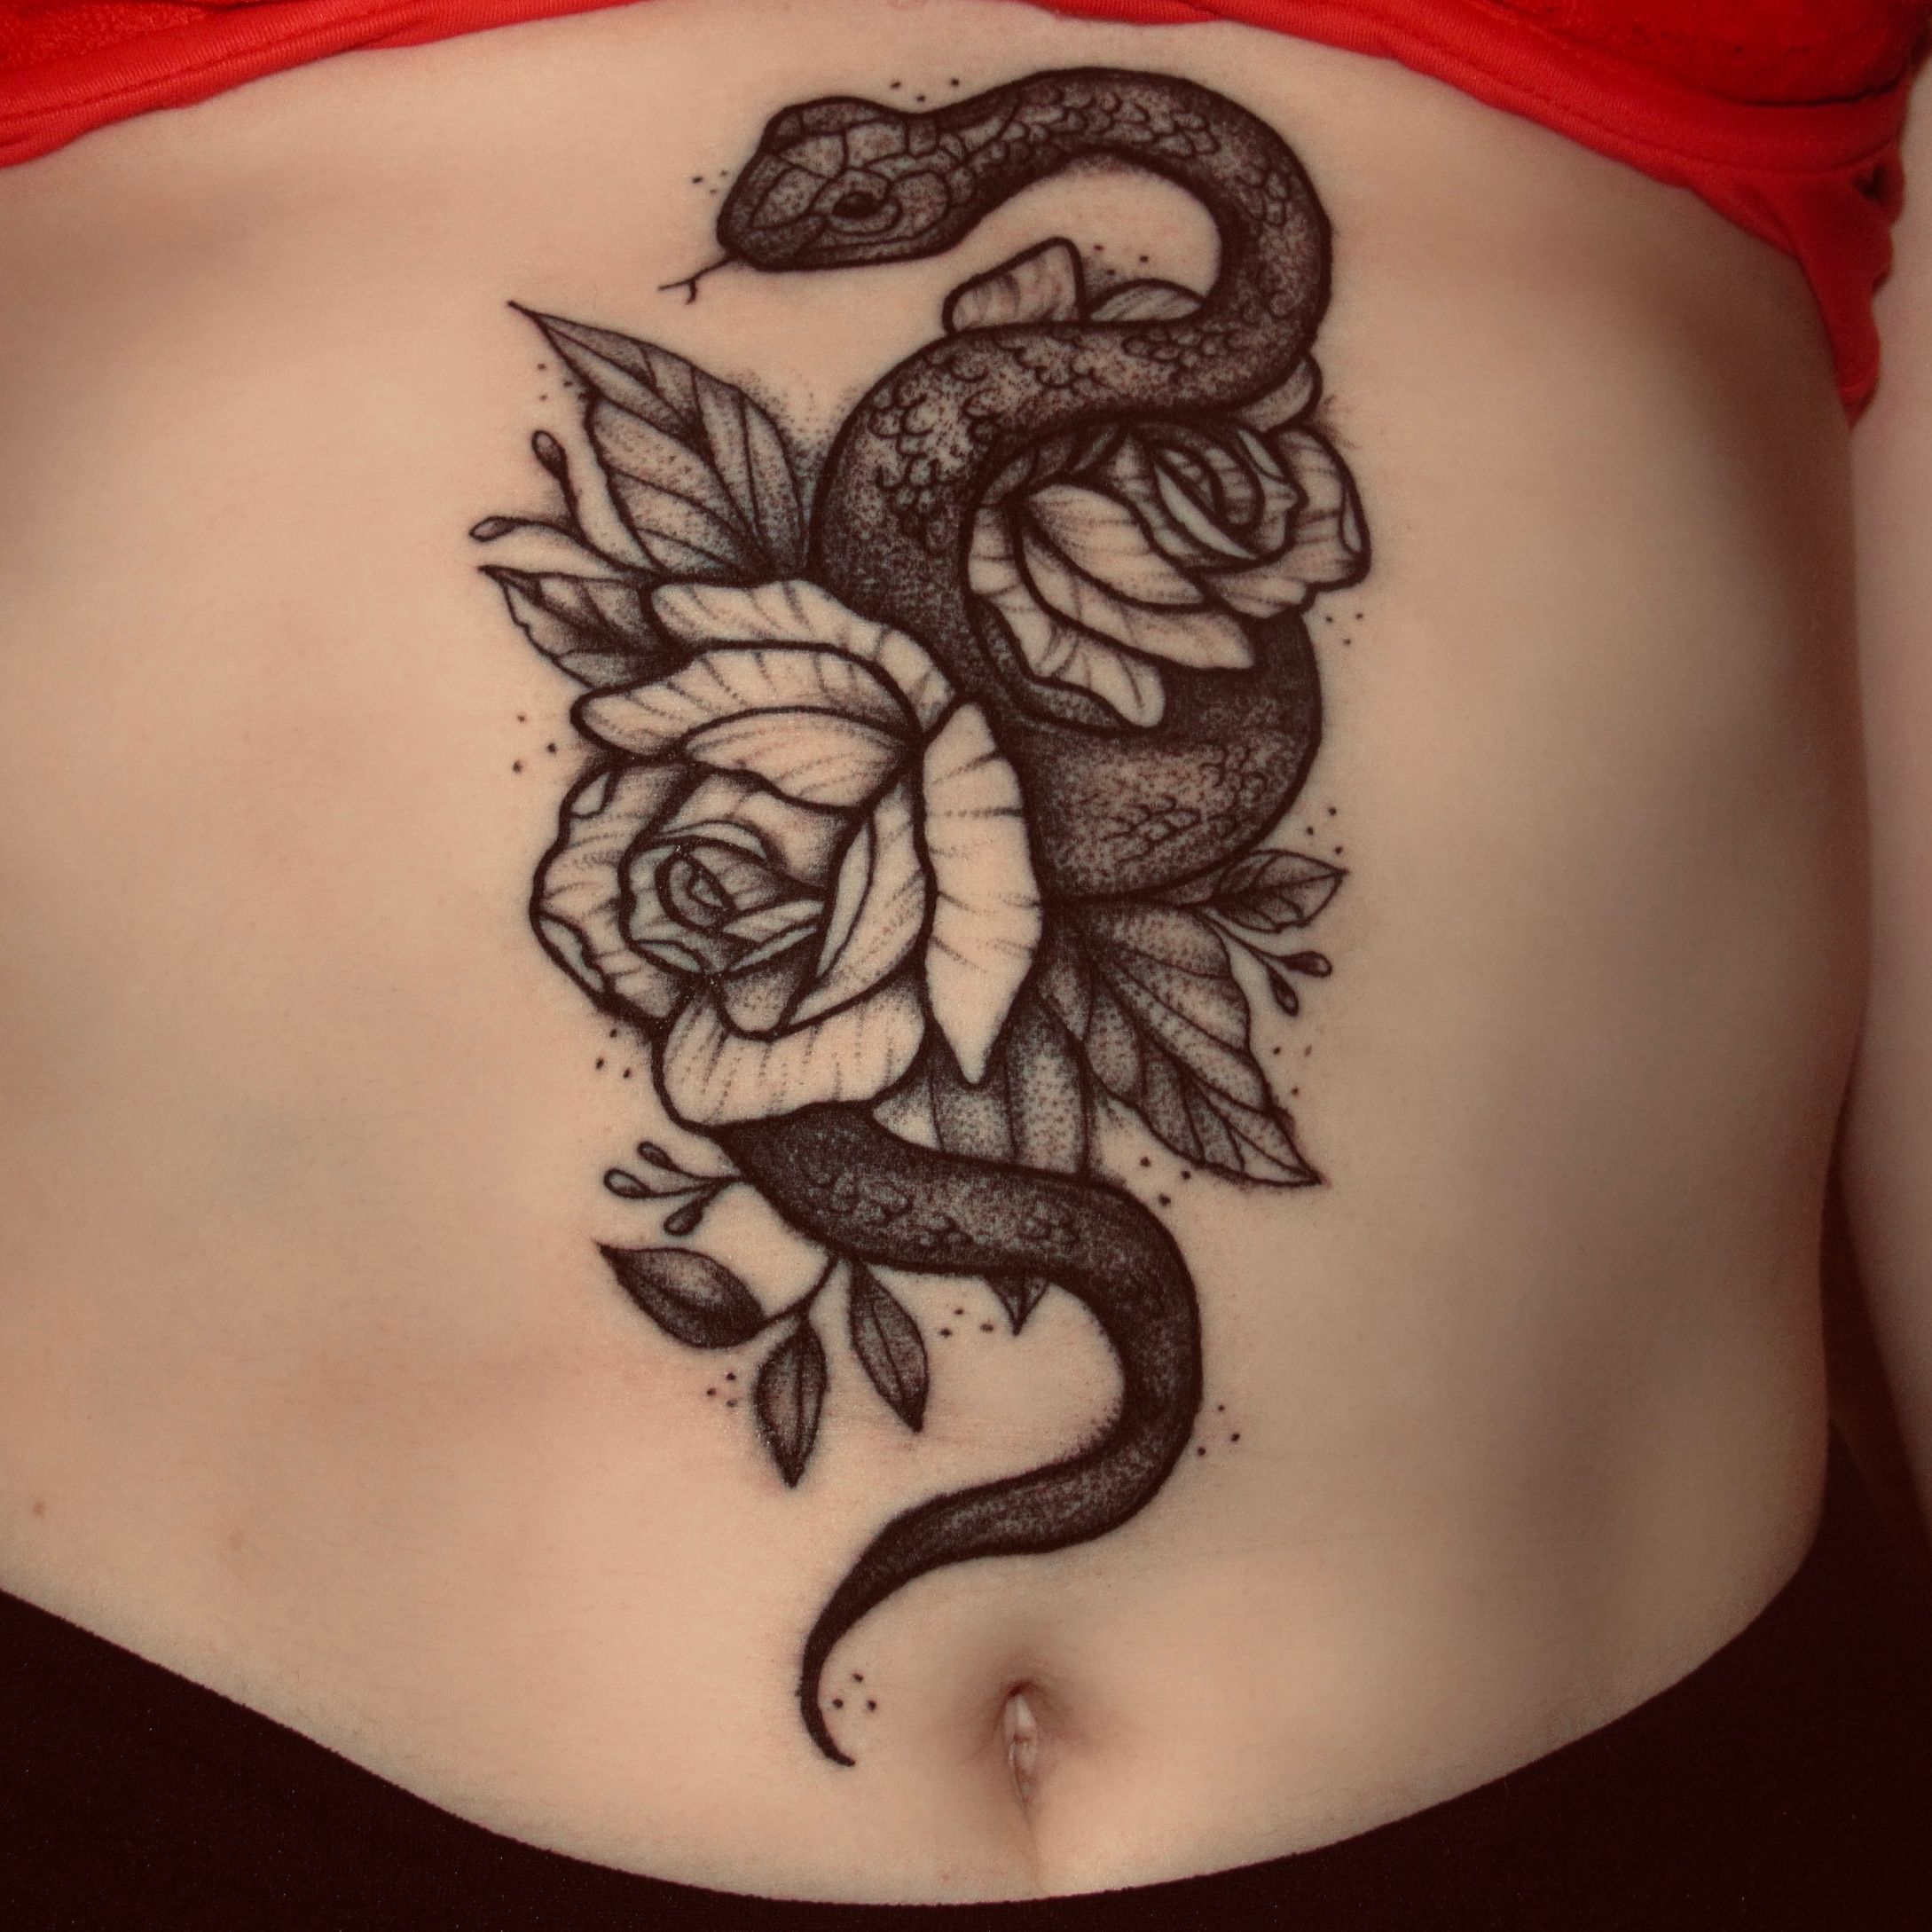 Red Rose Tattoo On Stomach  Tattoo Designs Tattoo Pictures